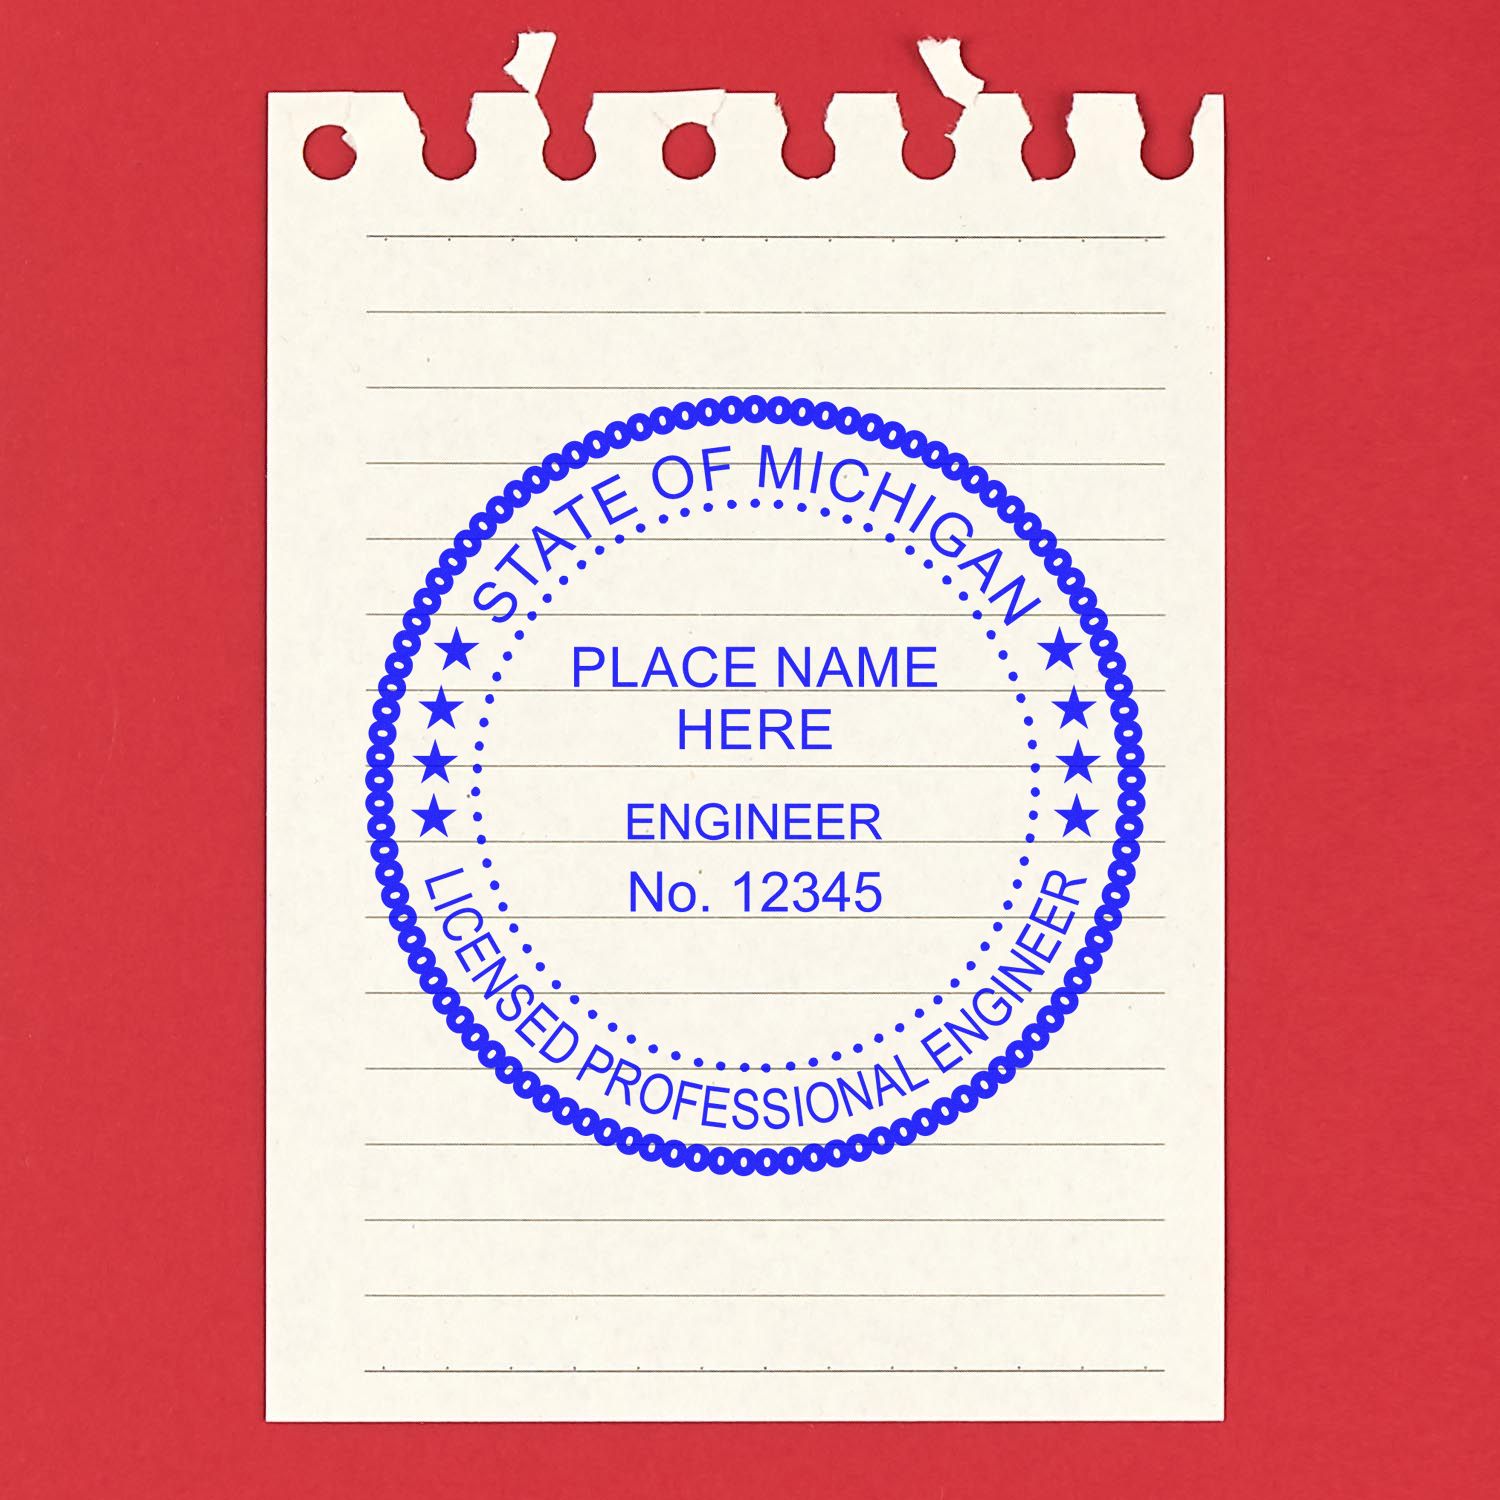 The main image for the Premium MaxLight Pre-Inked Michigan Engineering Stamp depicting a sample of the imprint and electronic files